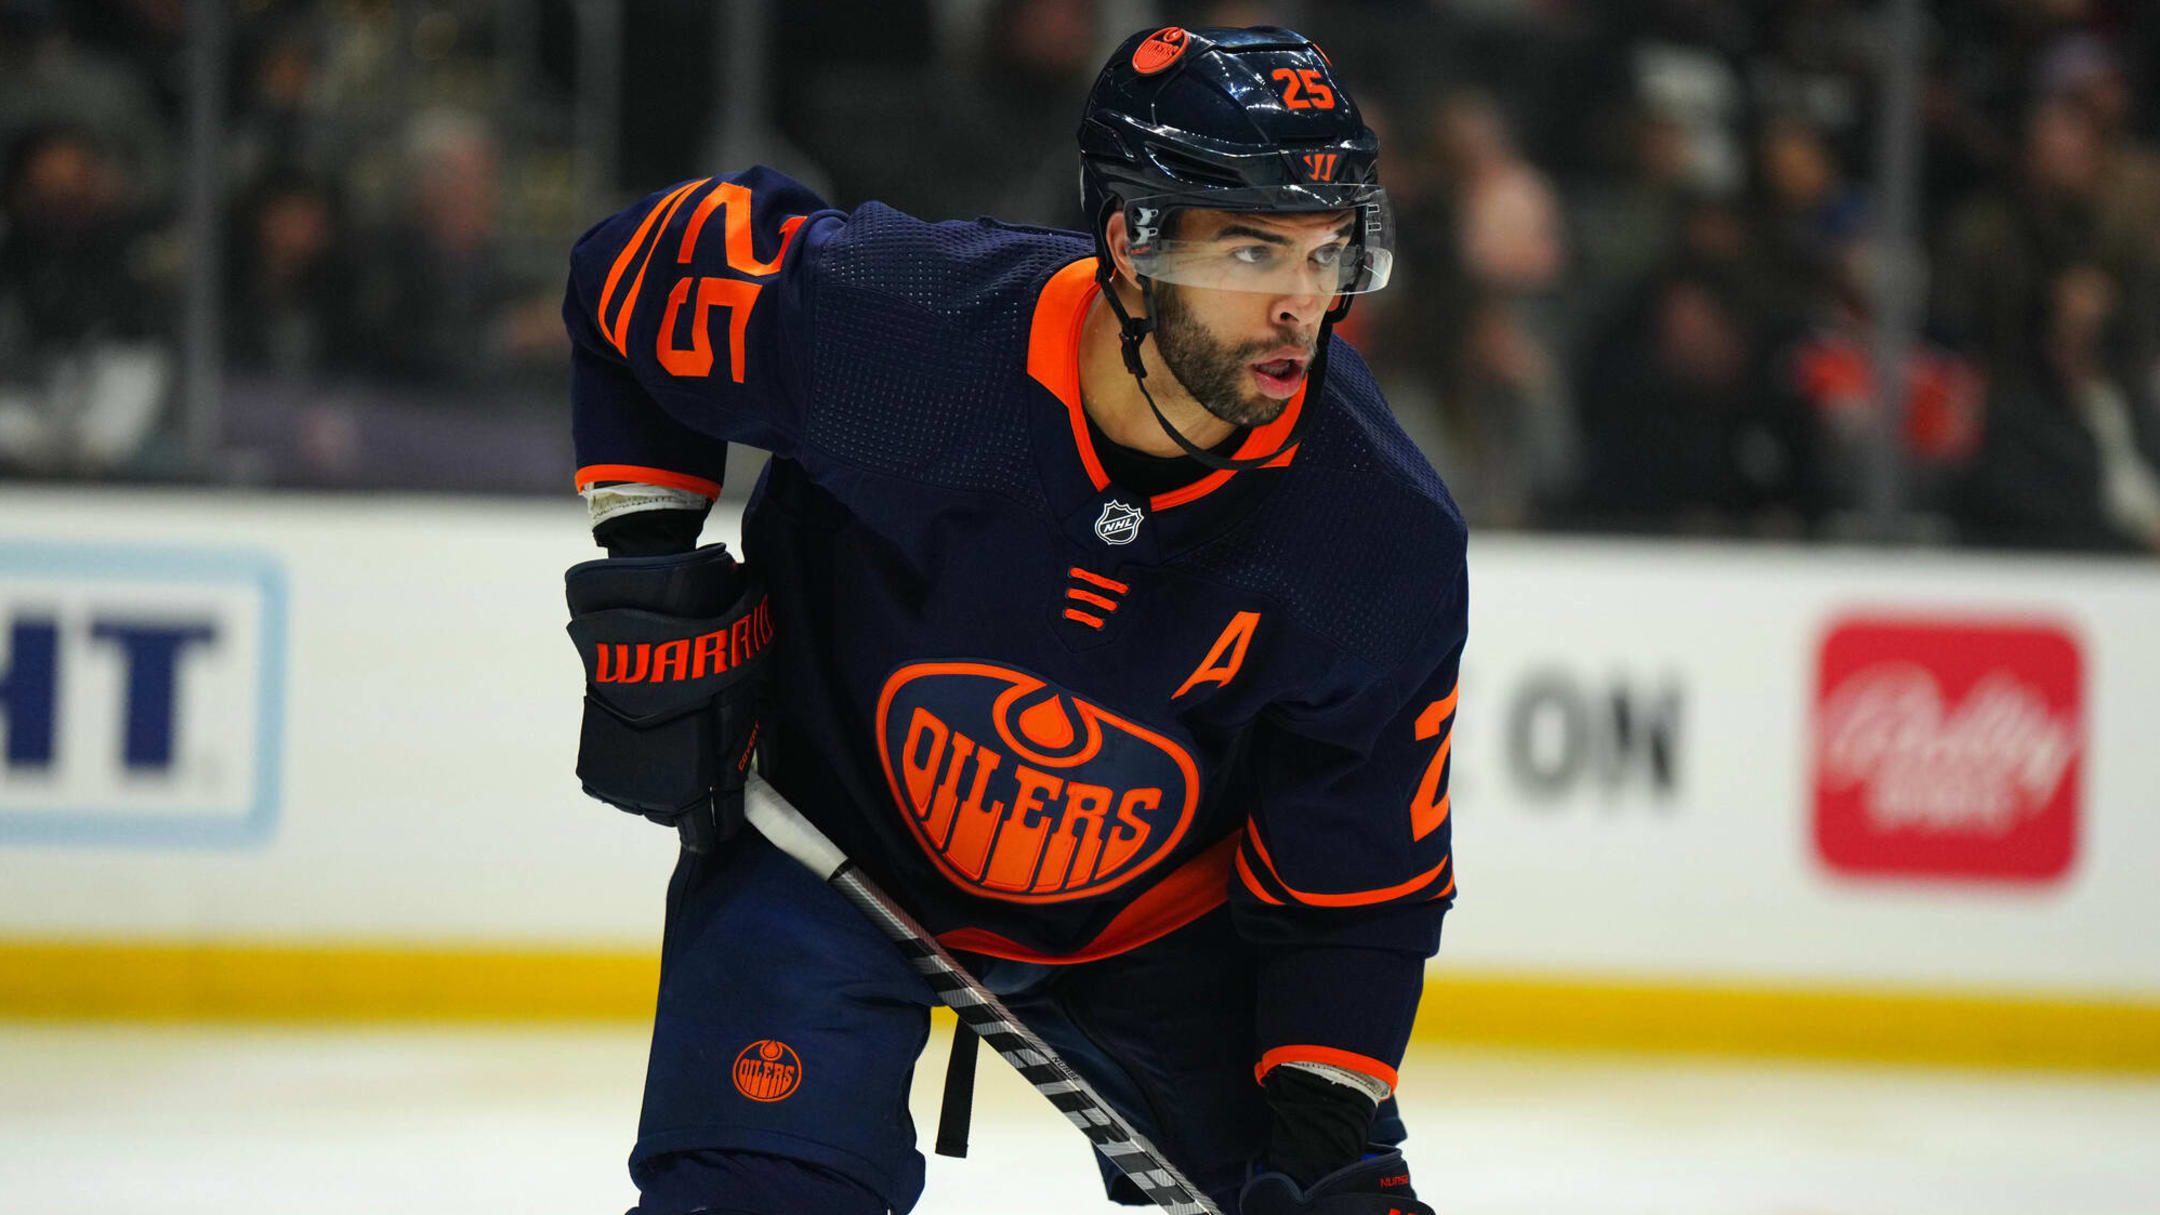 Oilers top defeseman suspended for one game